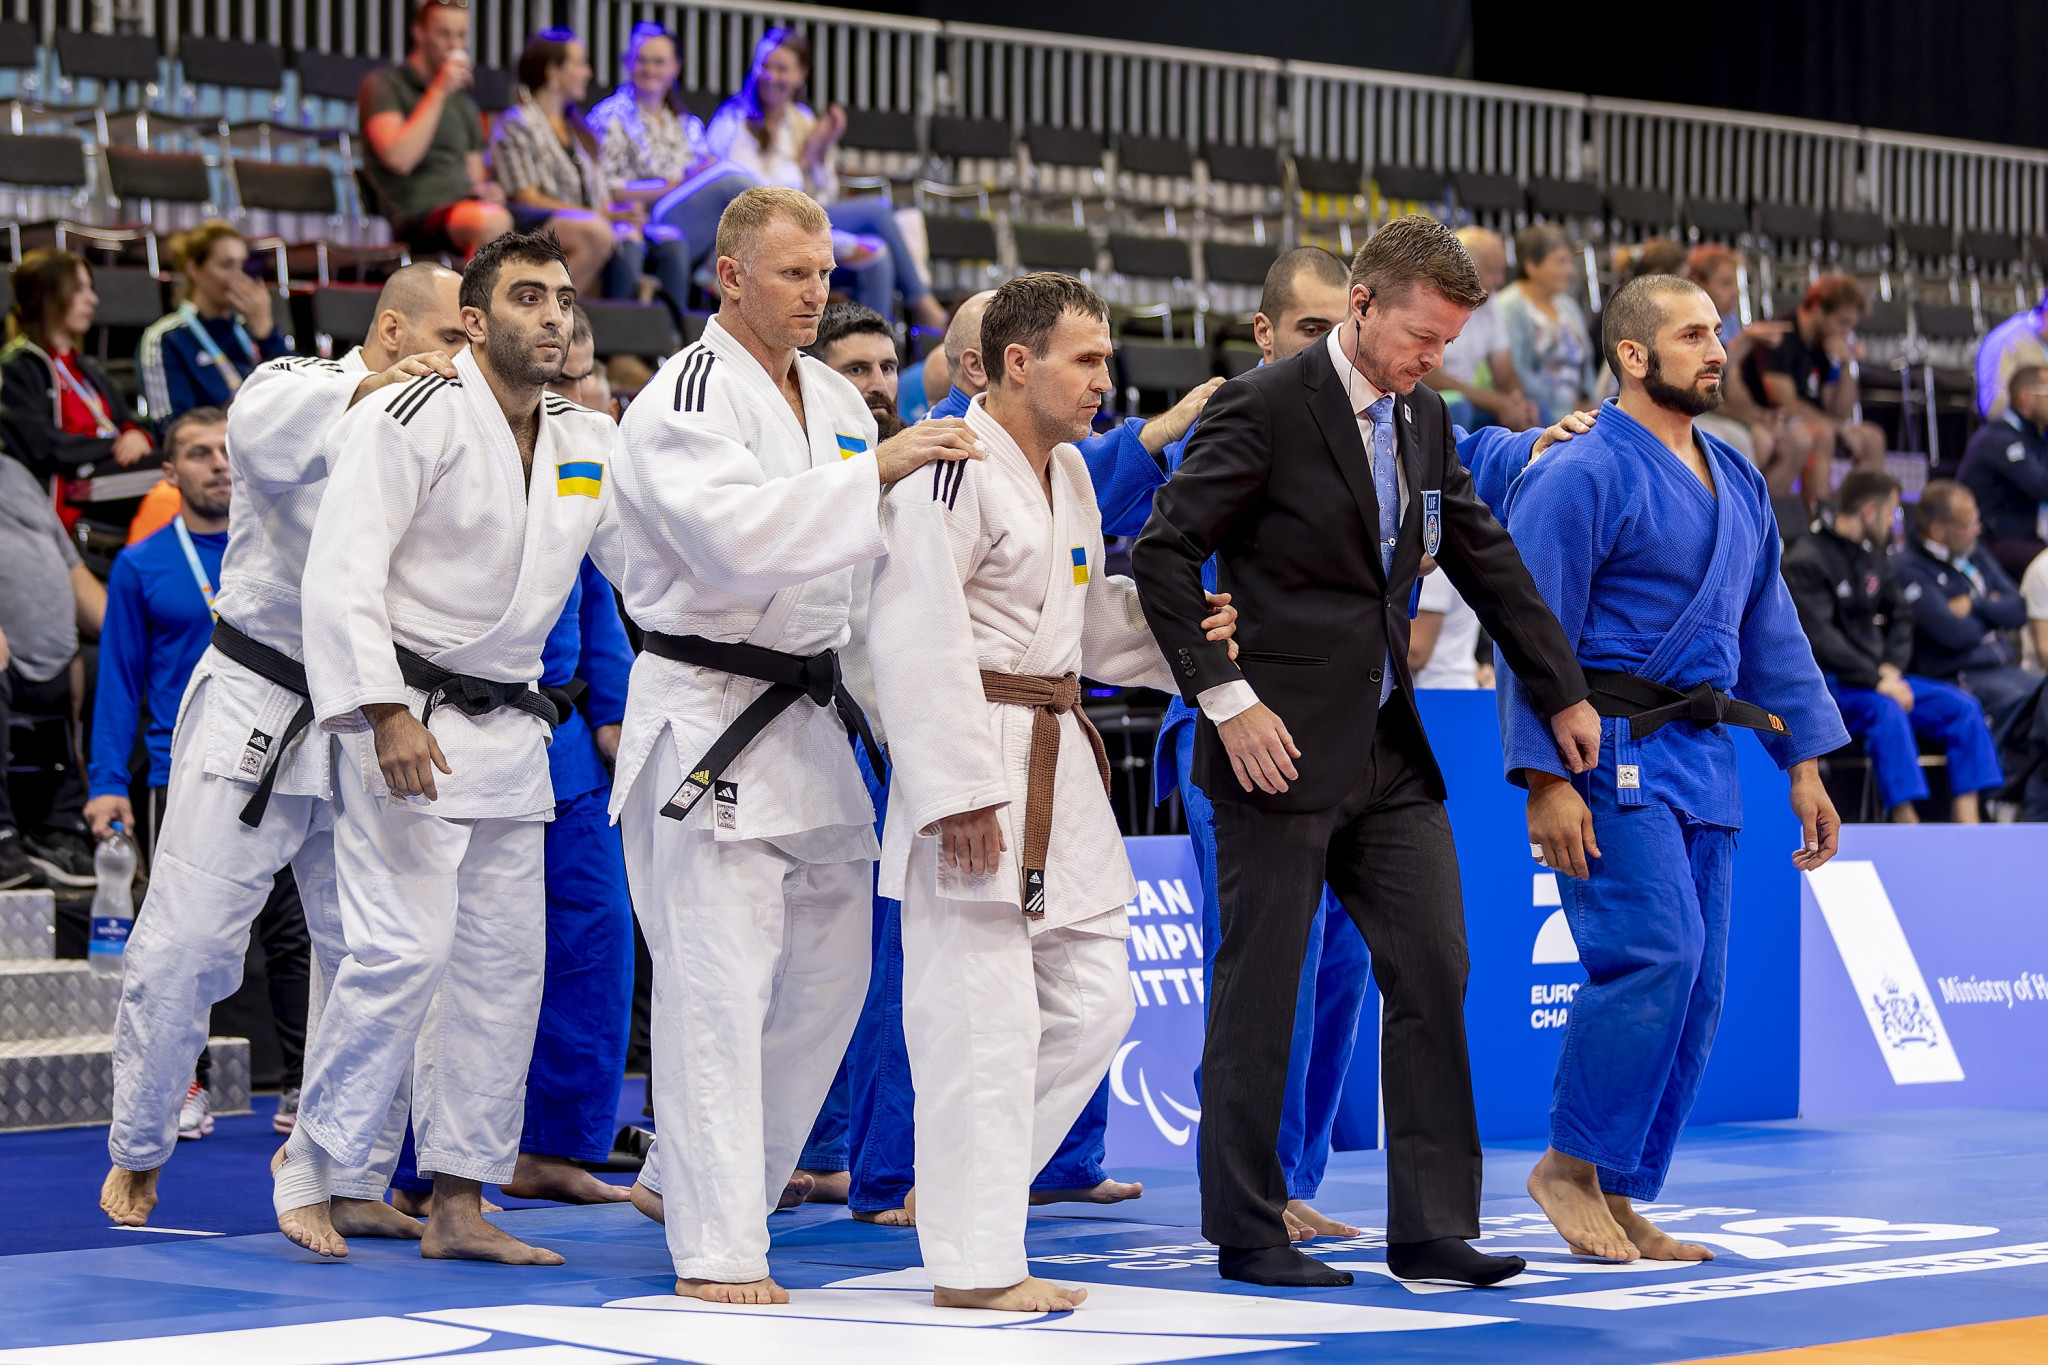 Para judo teams were led out before doing battle across the two tatamis ©EPC